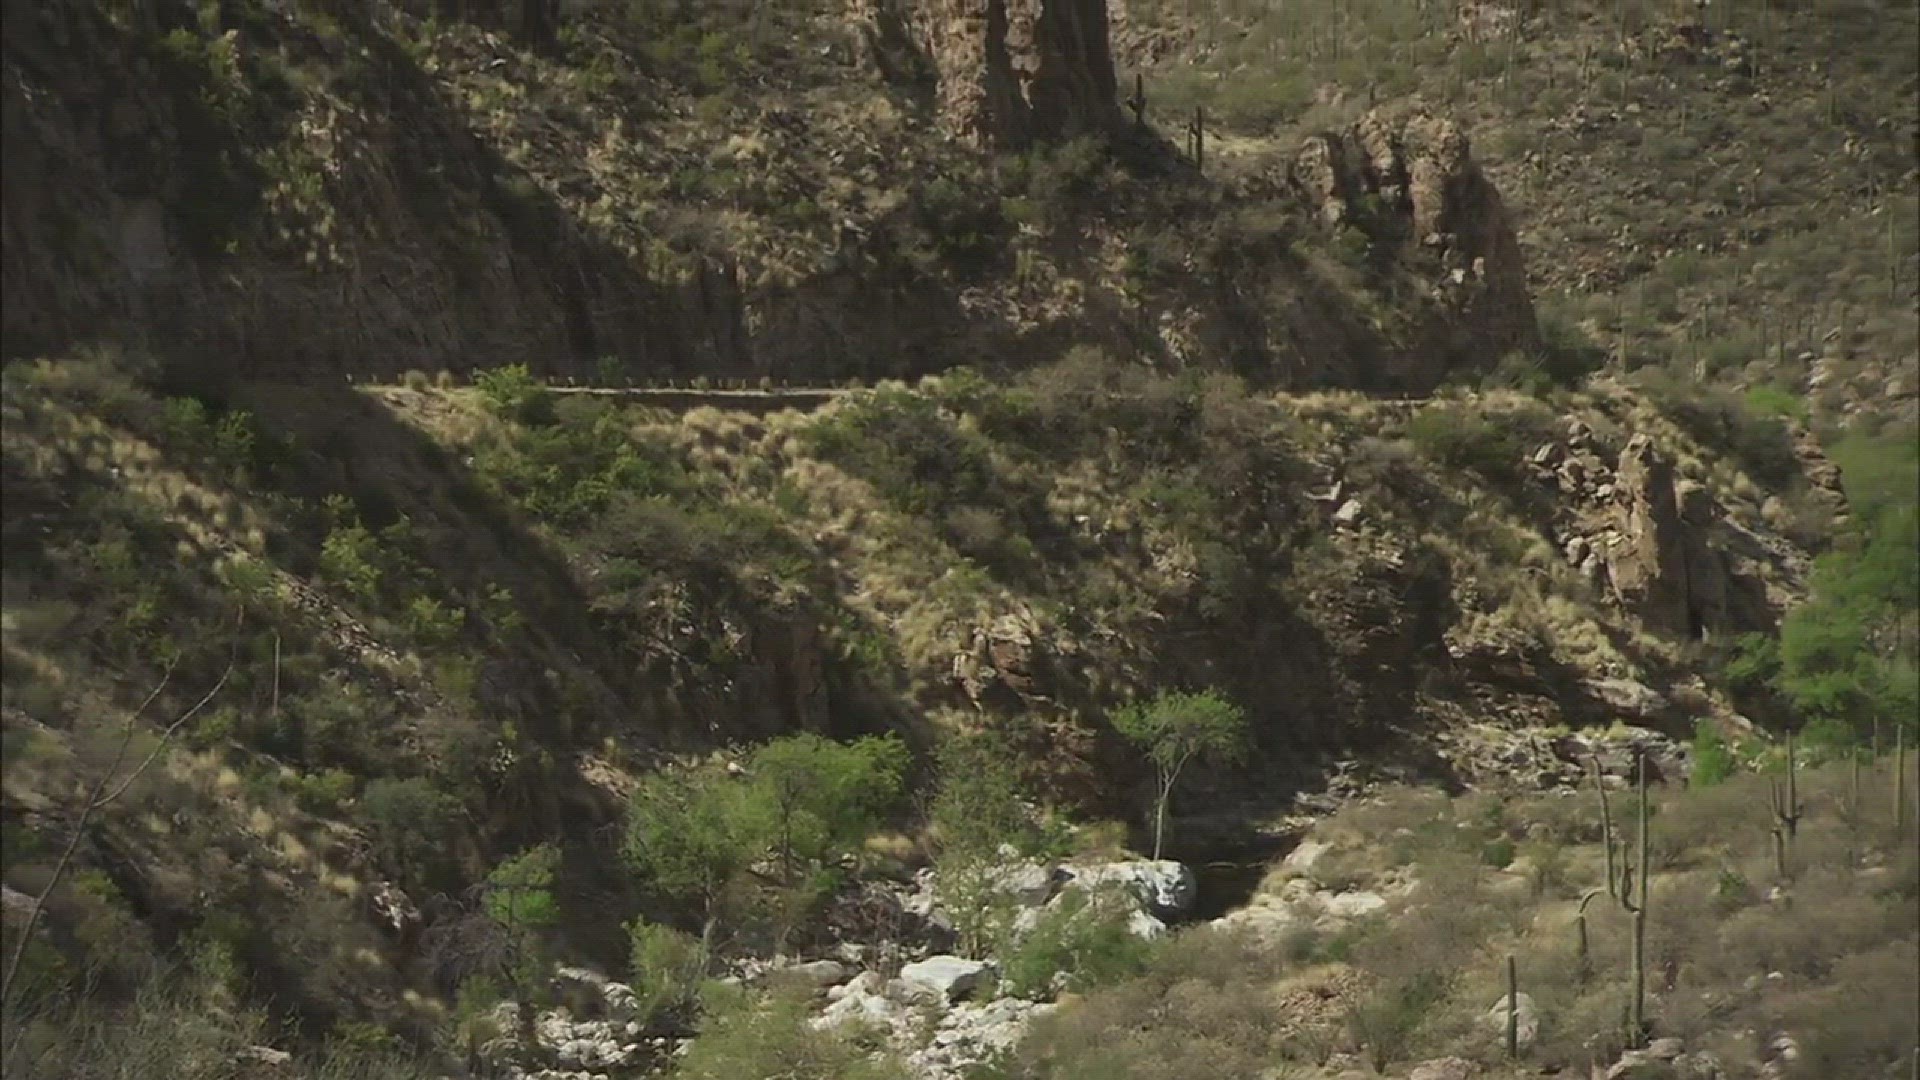 Sabino Canyon is one of those places Arizonans like to take out-of-state visitors to.